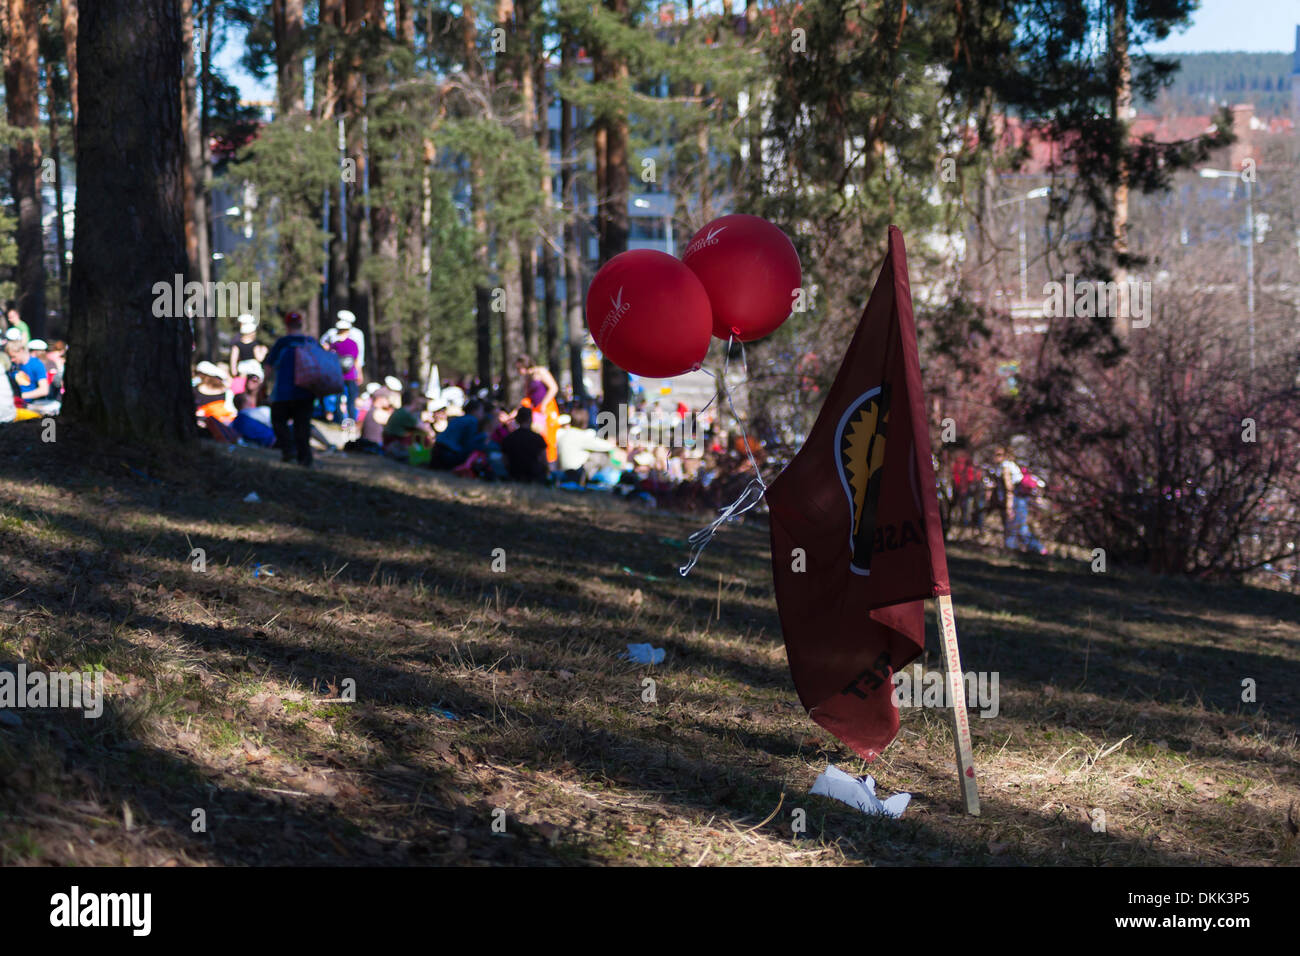 Students celebrating the first of May, the International Worker's Day, at Harju recreational area in Jyväskylä. Stock Photo